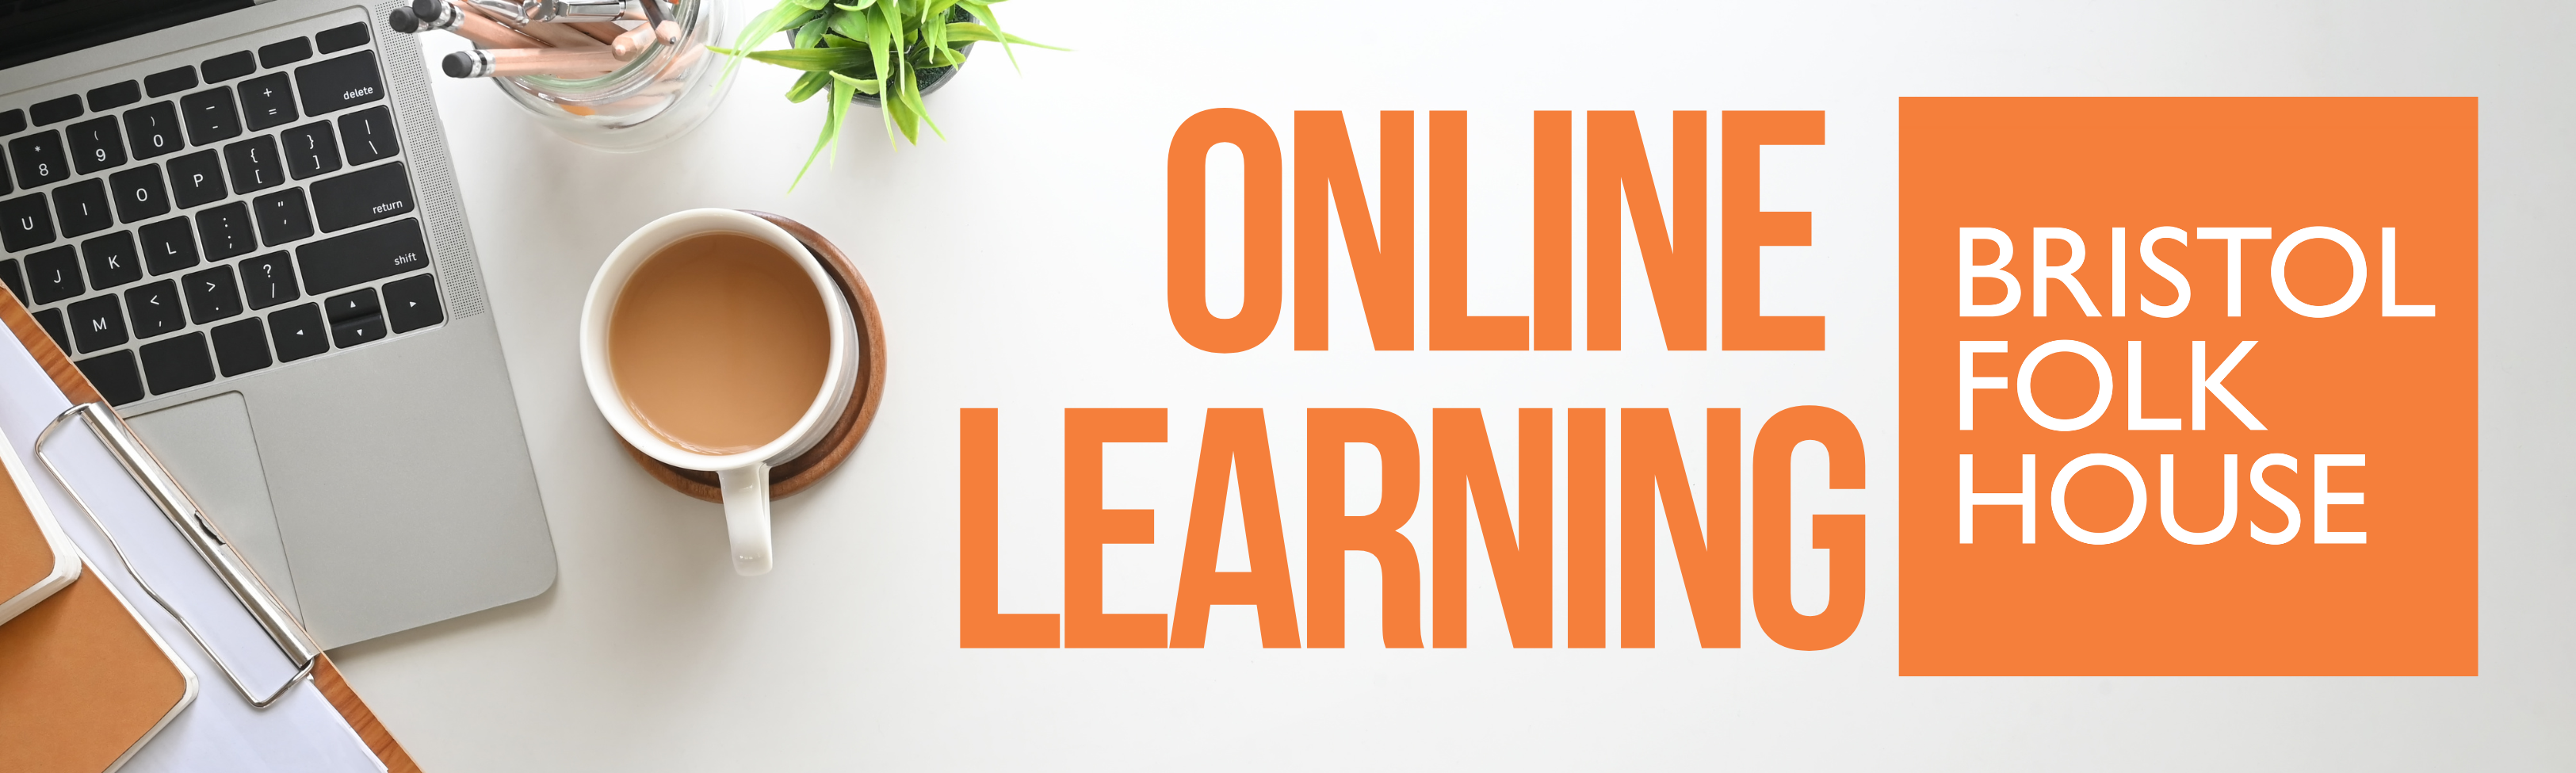 Online Courses and Workshops